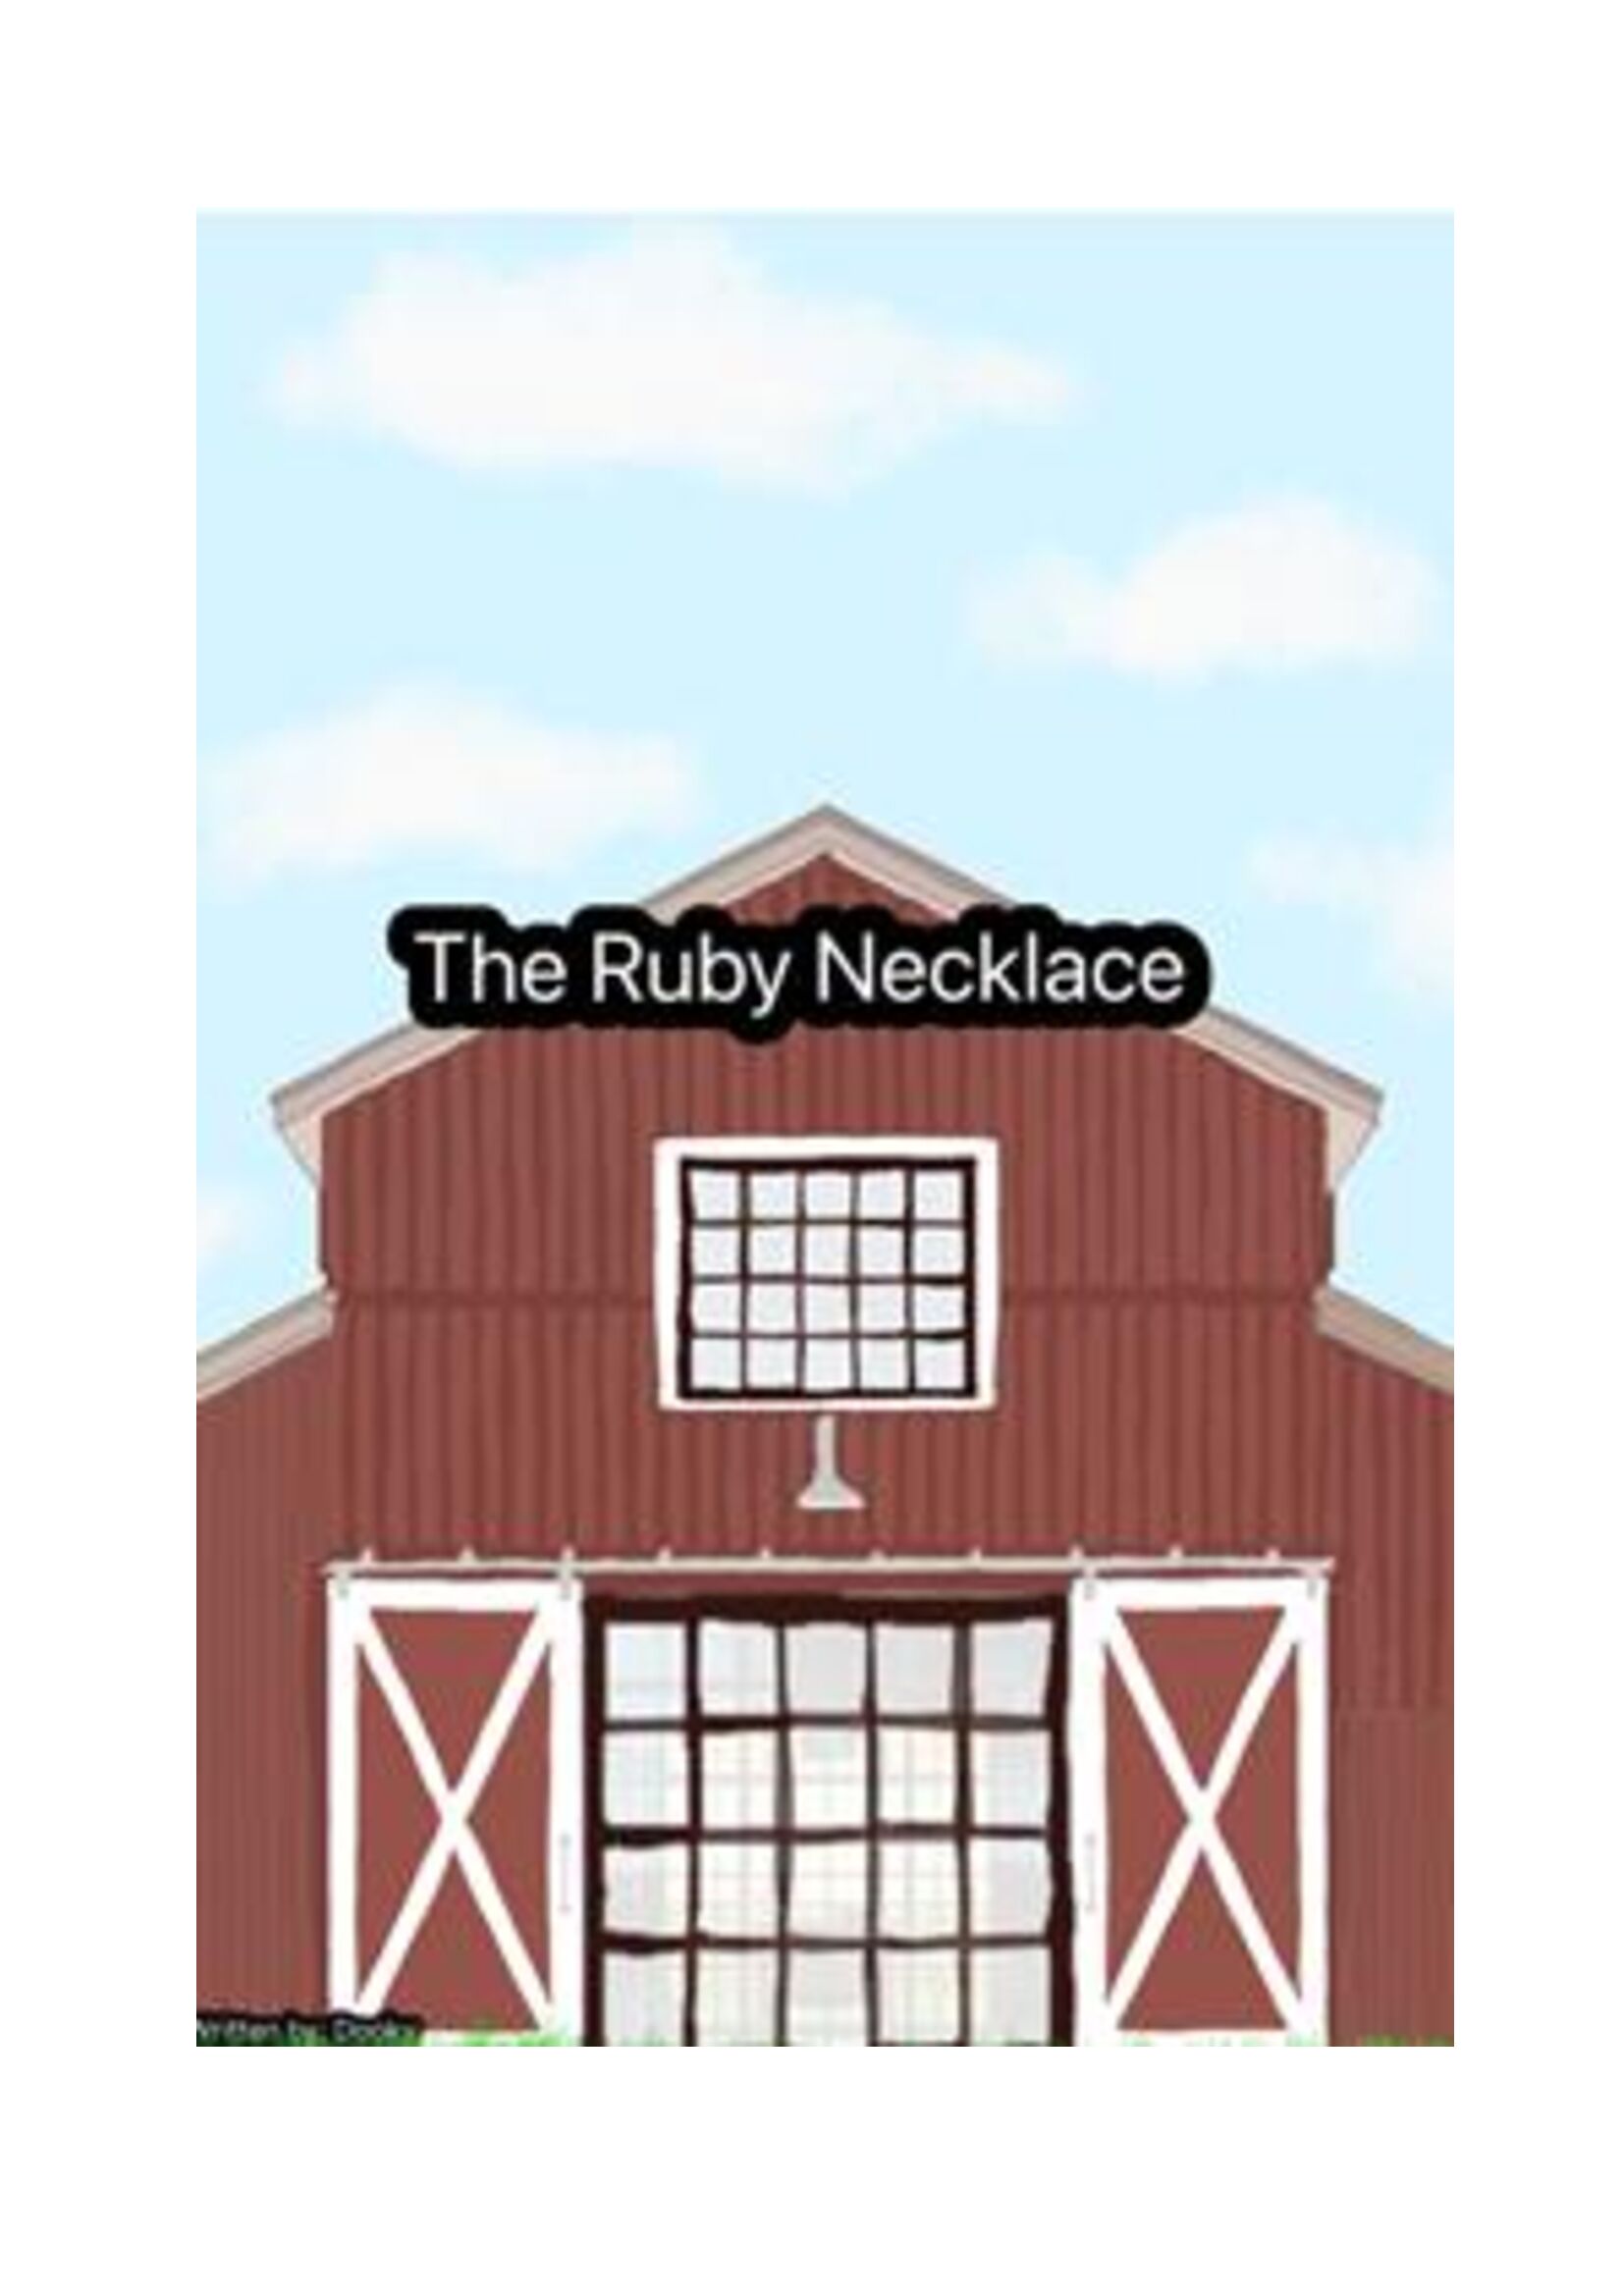 The Ruby Necklace